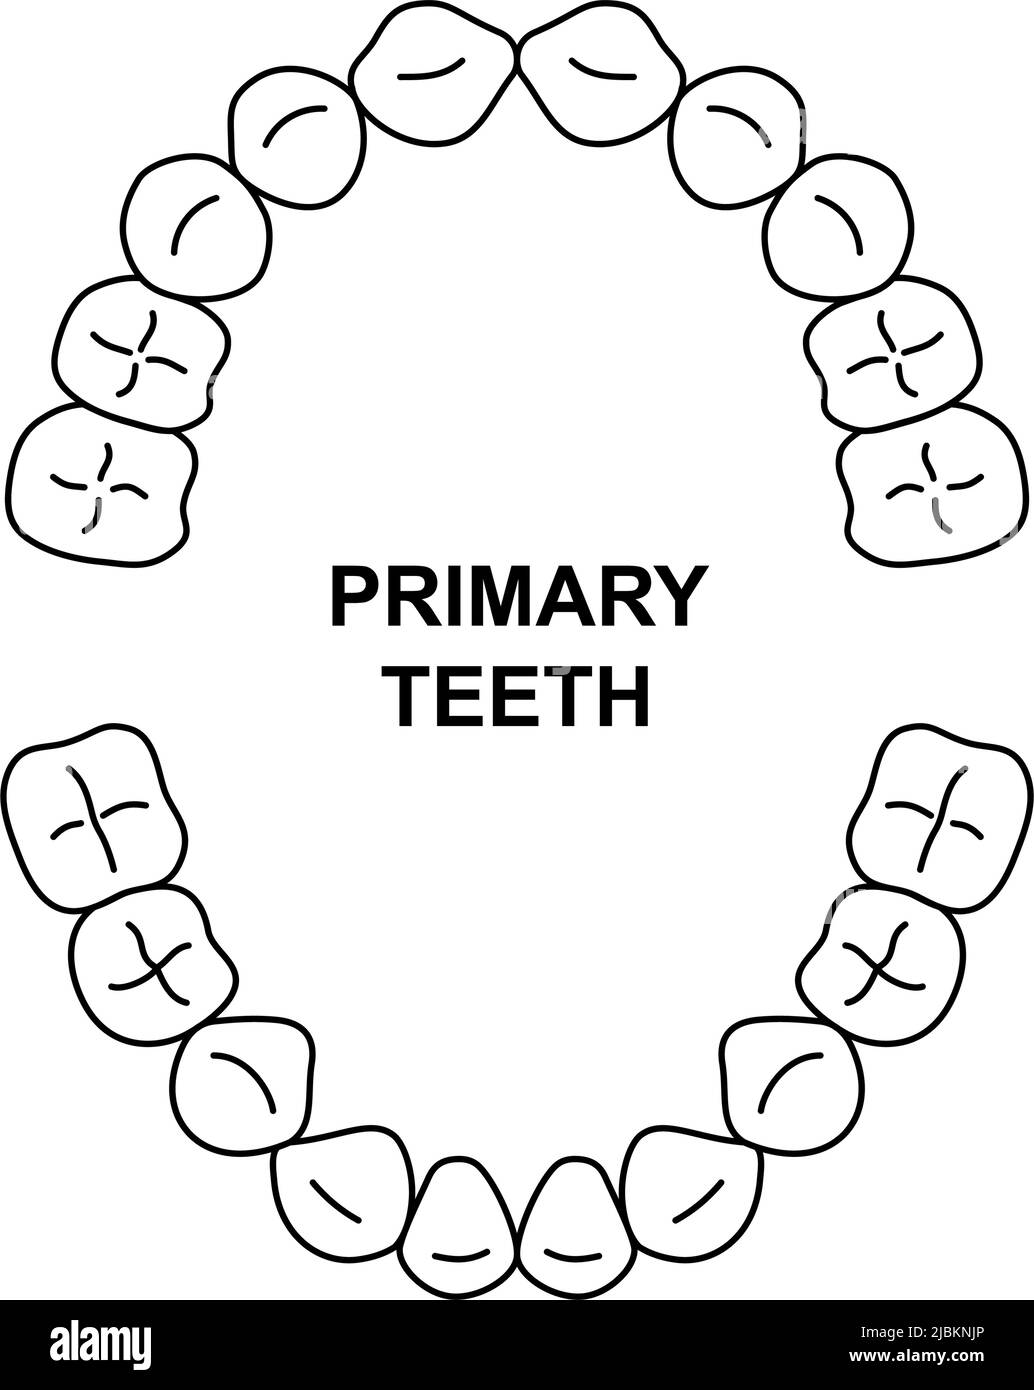 Primary teeth dentition anatomy. Child upper and lower jaw. Child tooth arrival chart. Primary teeth silhouette Stock Vector